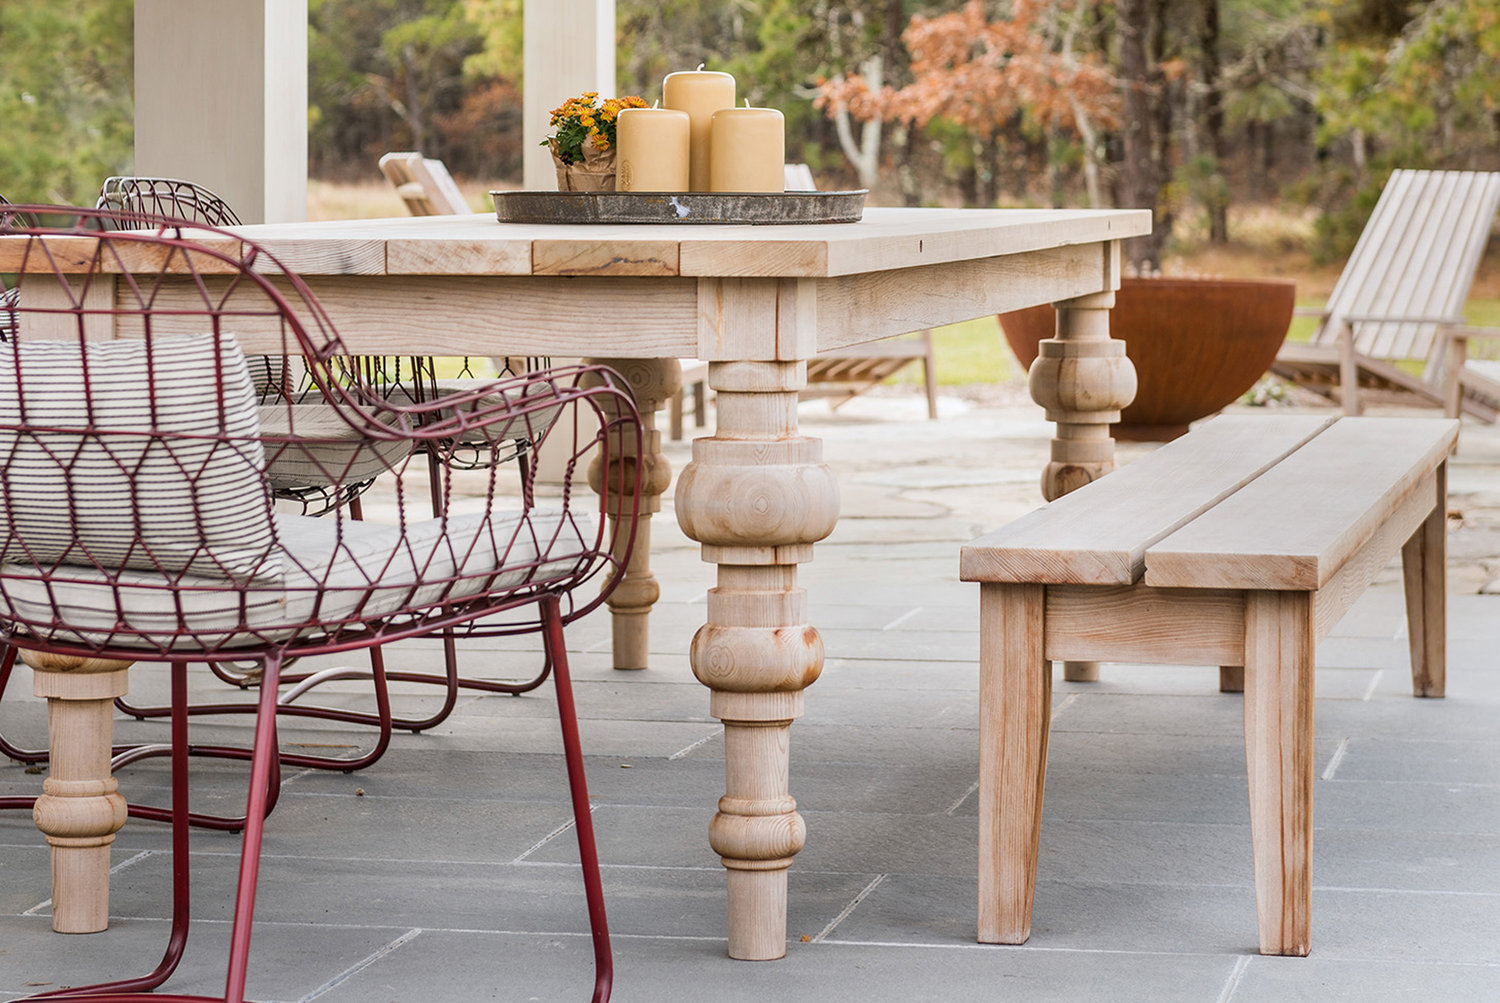 A collaboration with Hutker Architects, this patio table was inspired by an antique Parisian table and made with reclaimed late 1800s redwood from a New Hampshire navy yard